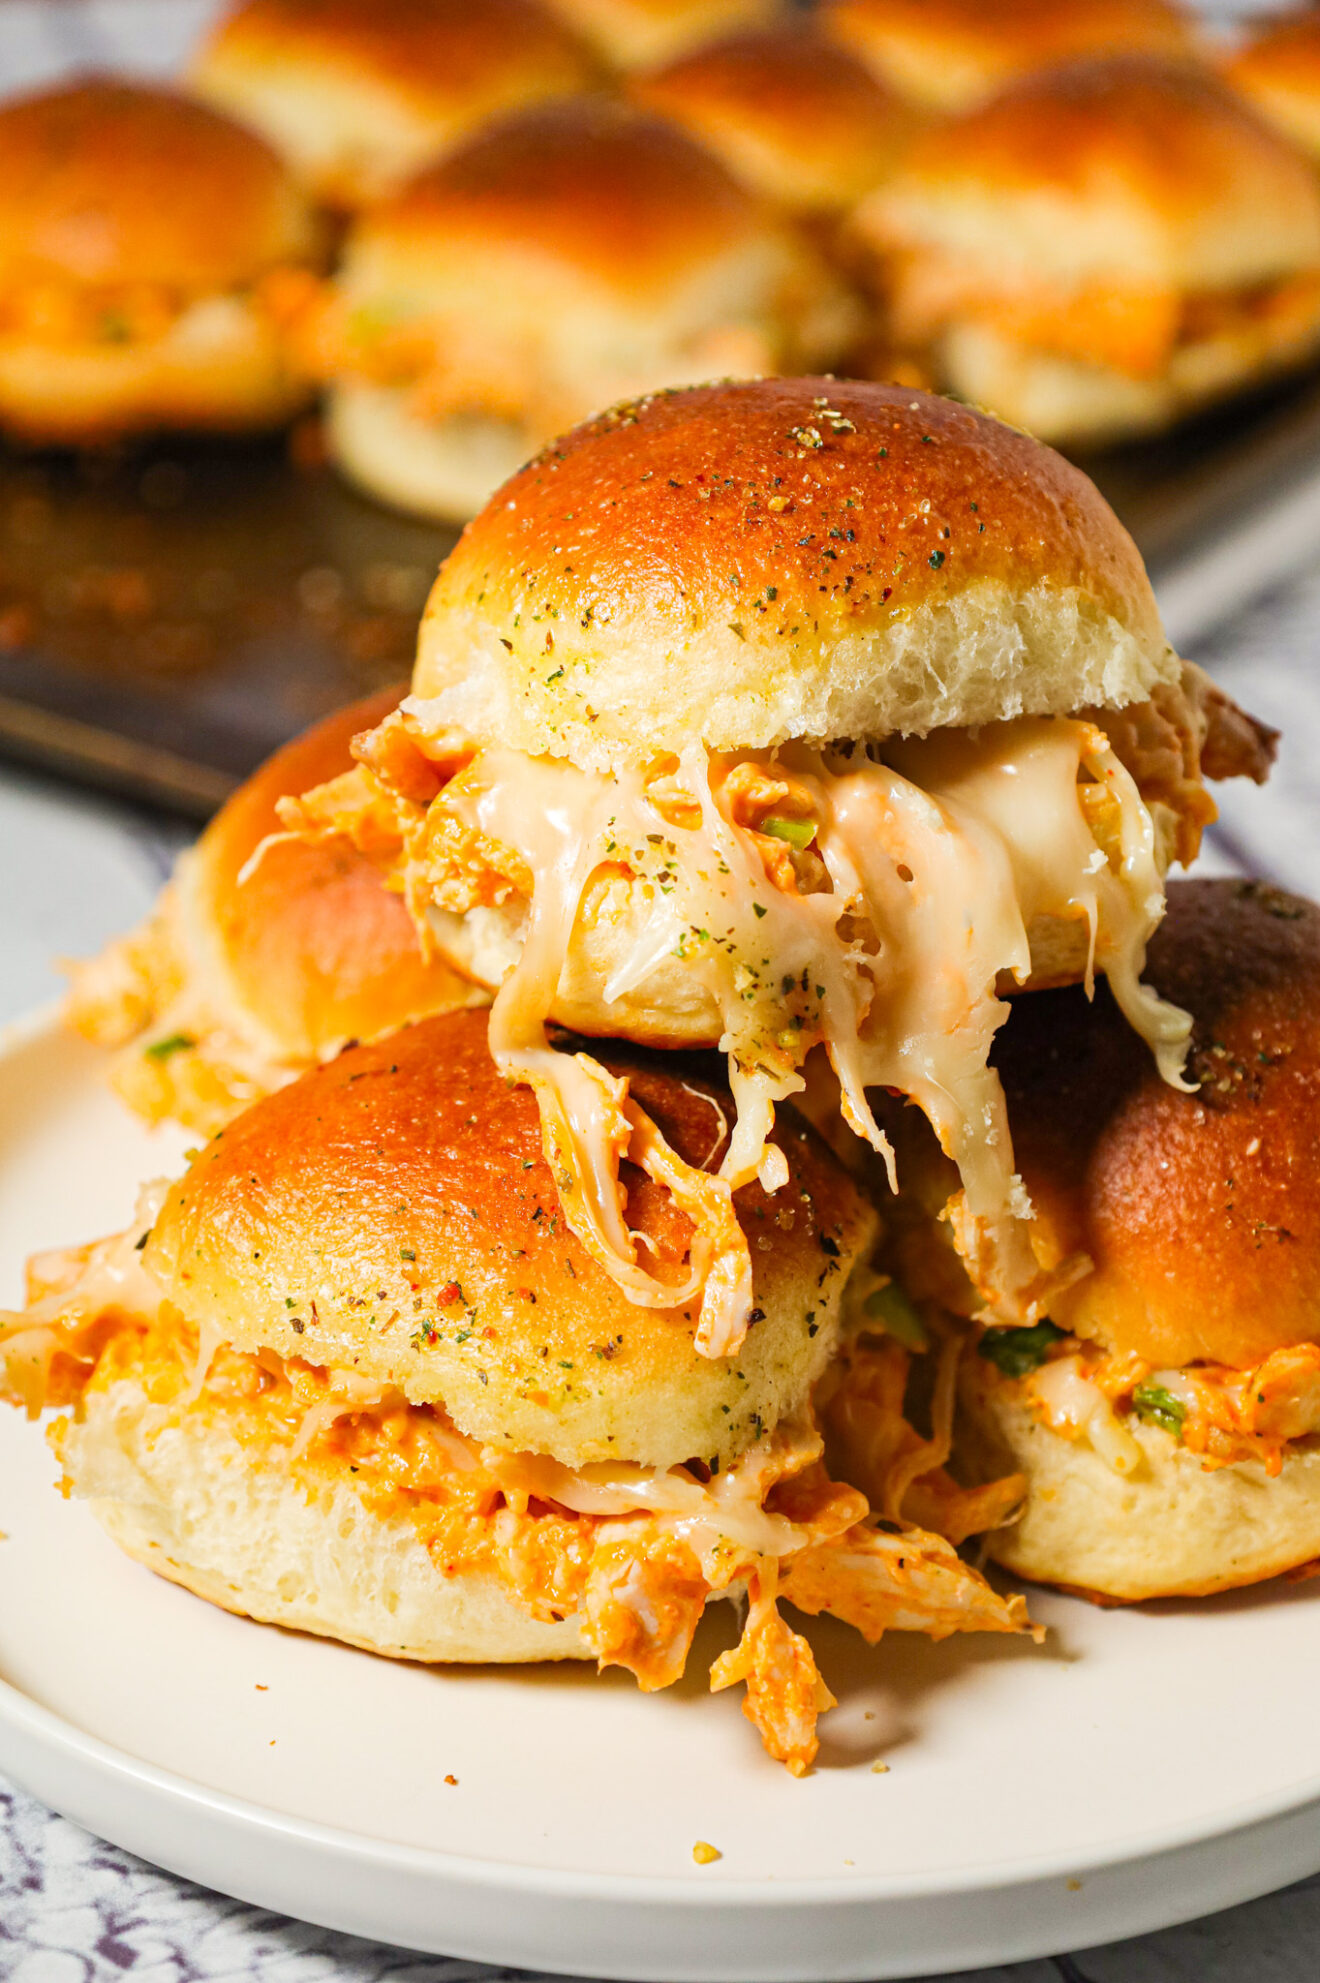 Buffalo Chicken Sliders - THIS IS NOT DIET FOOD